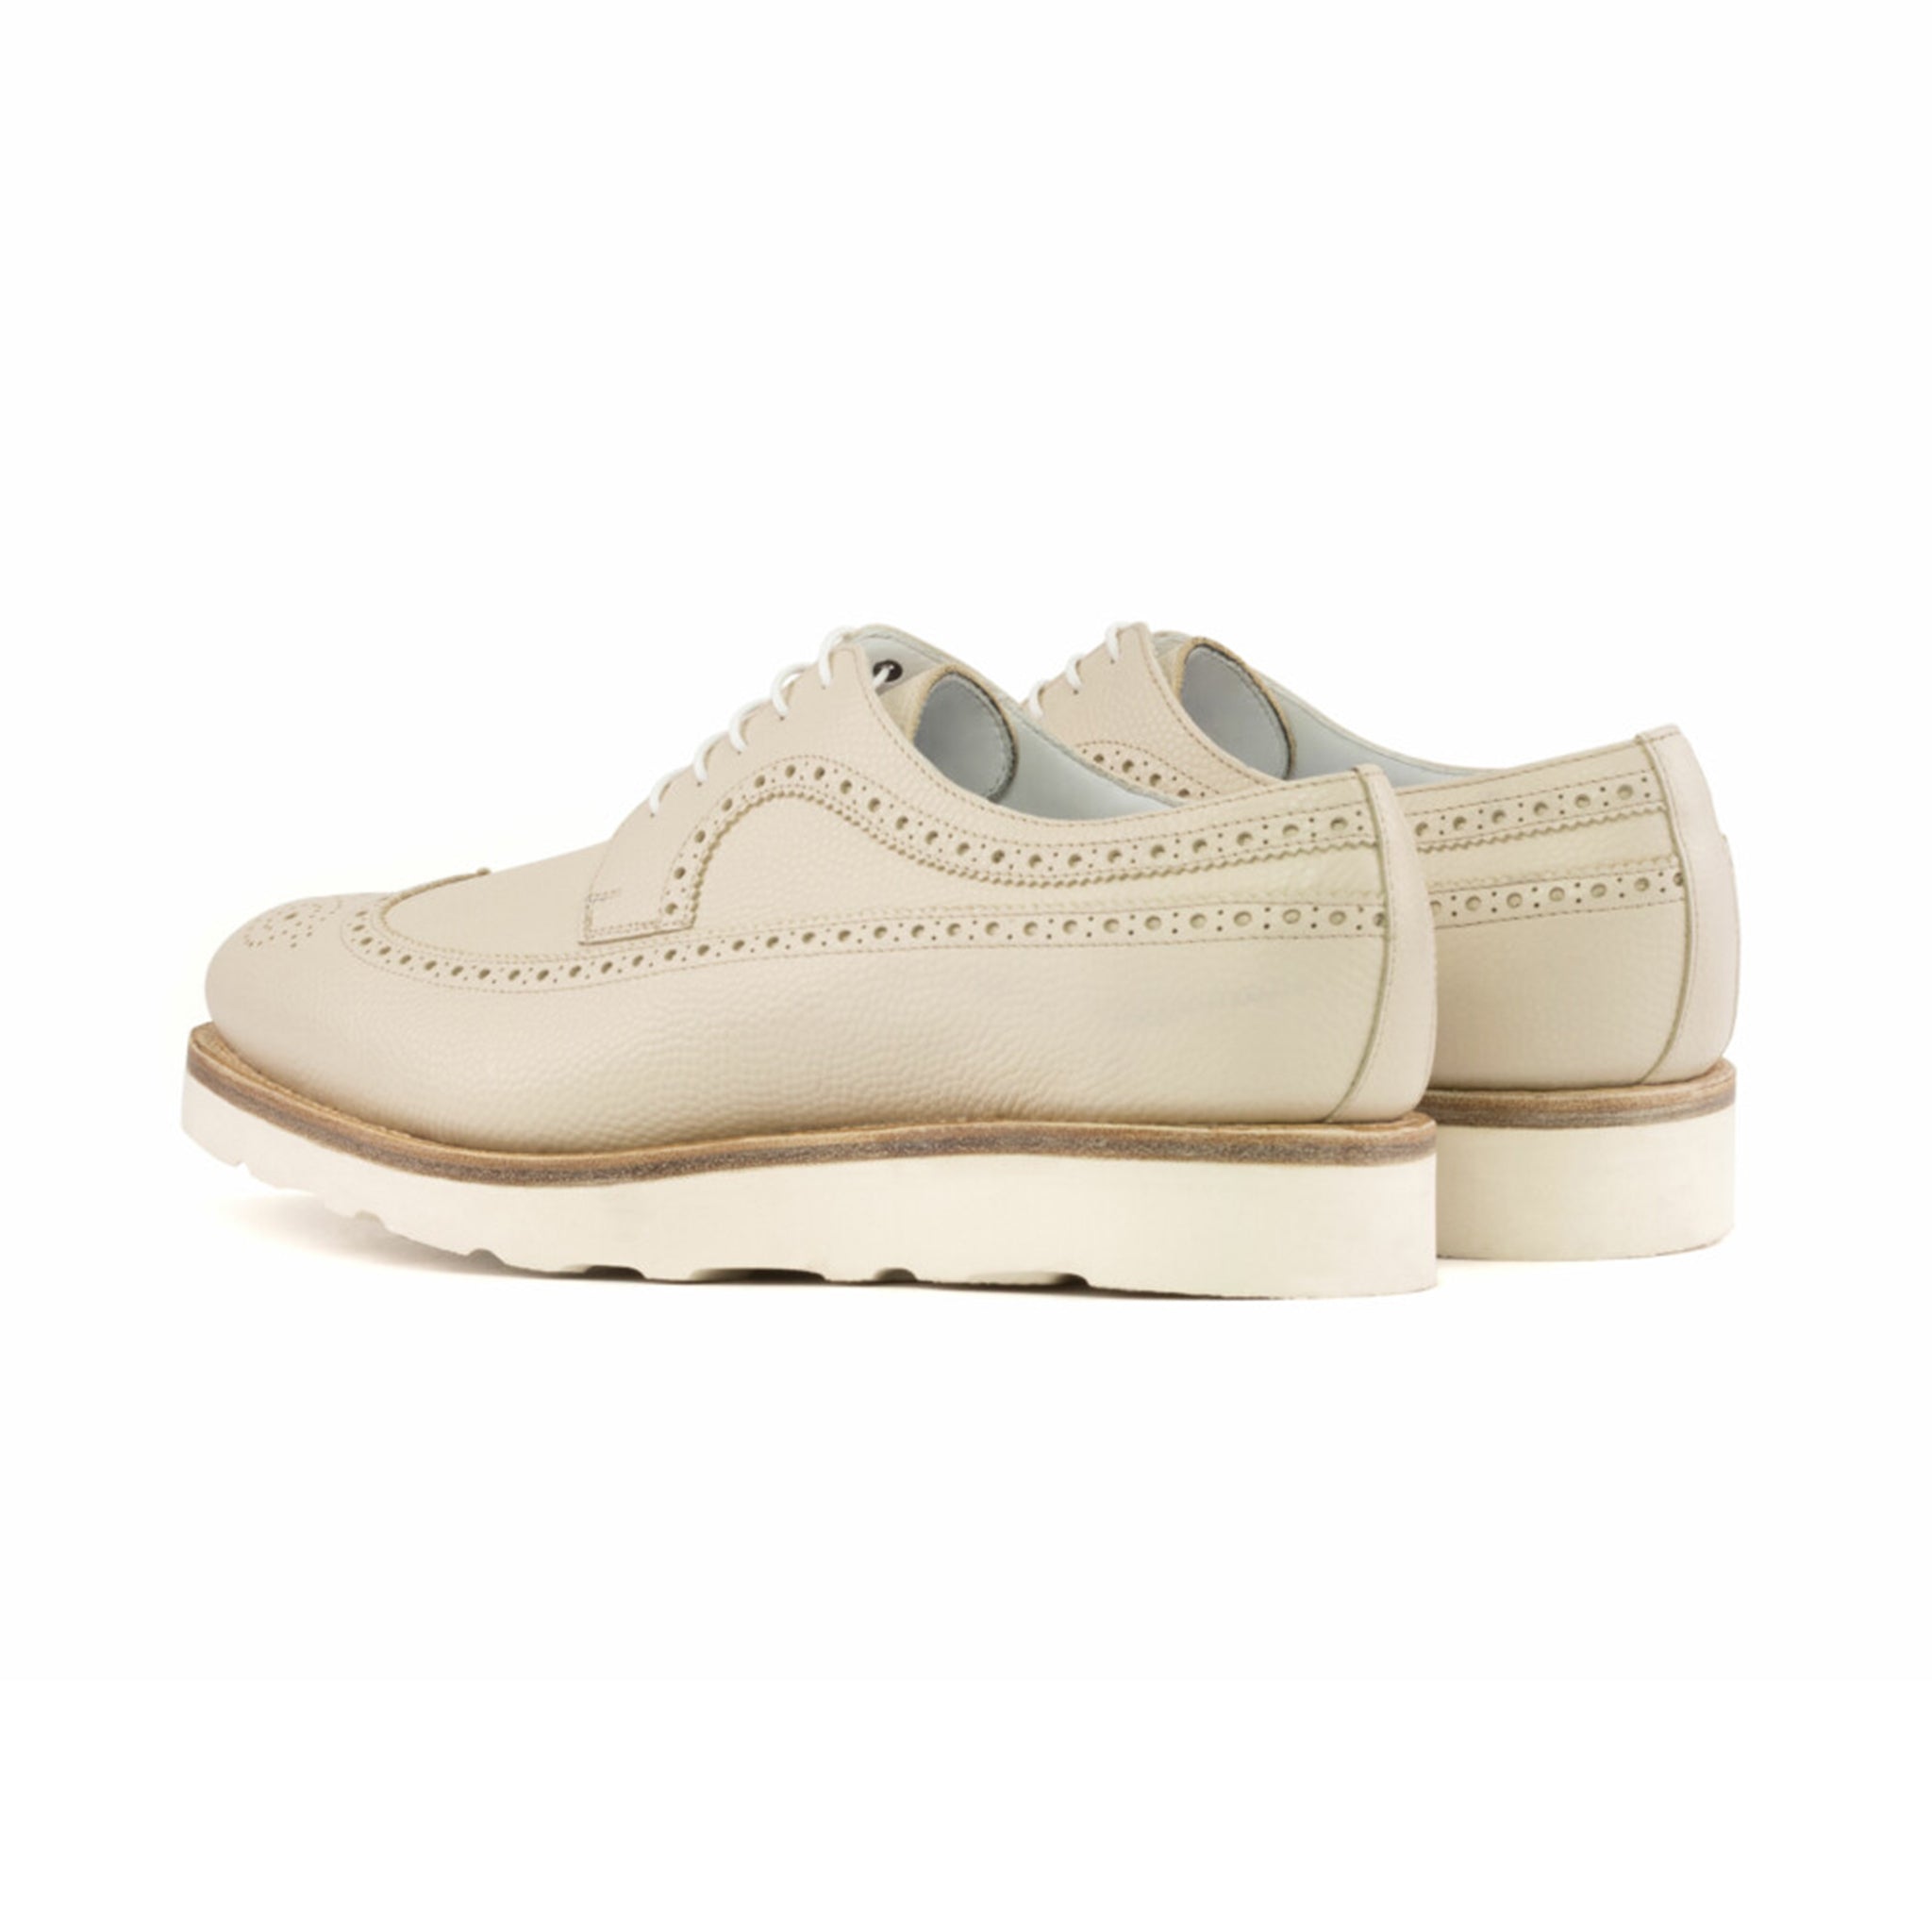 Nude Leather Casual Brogues